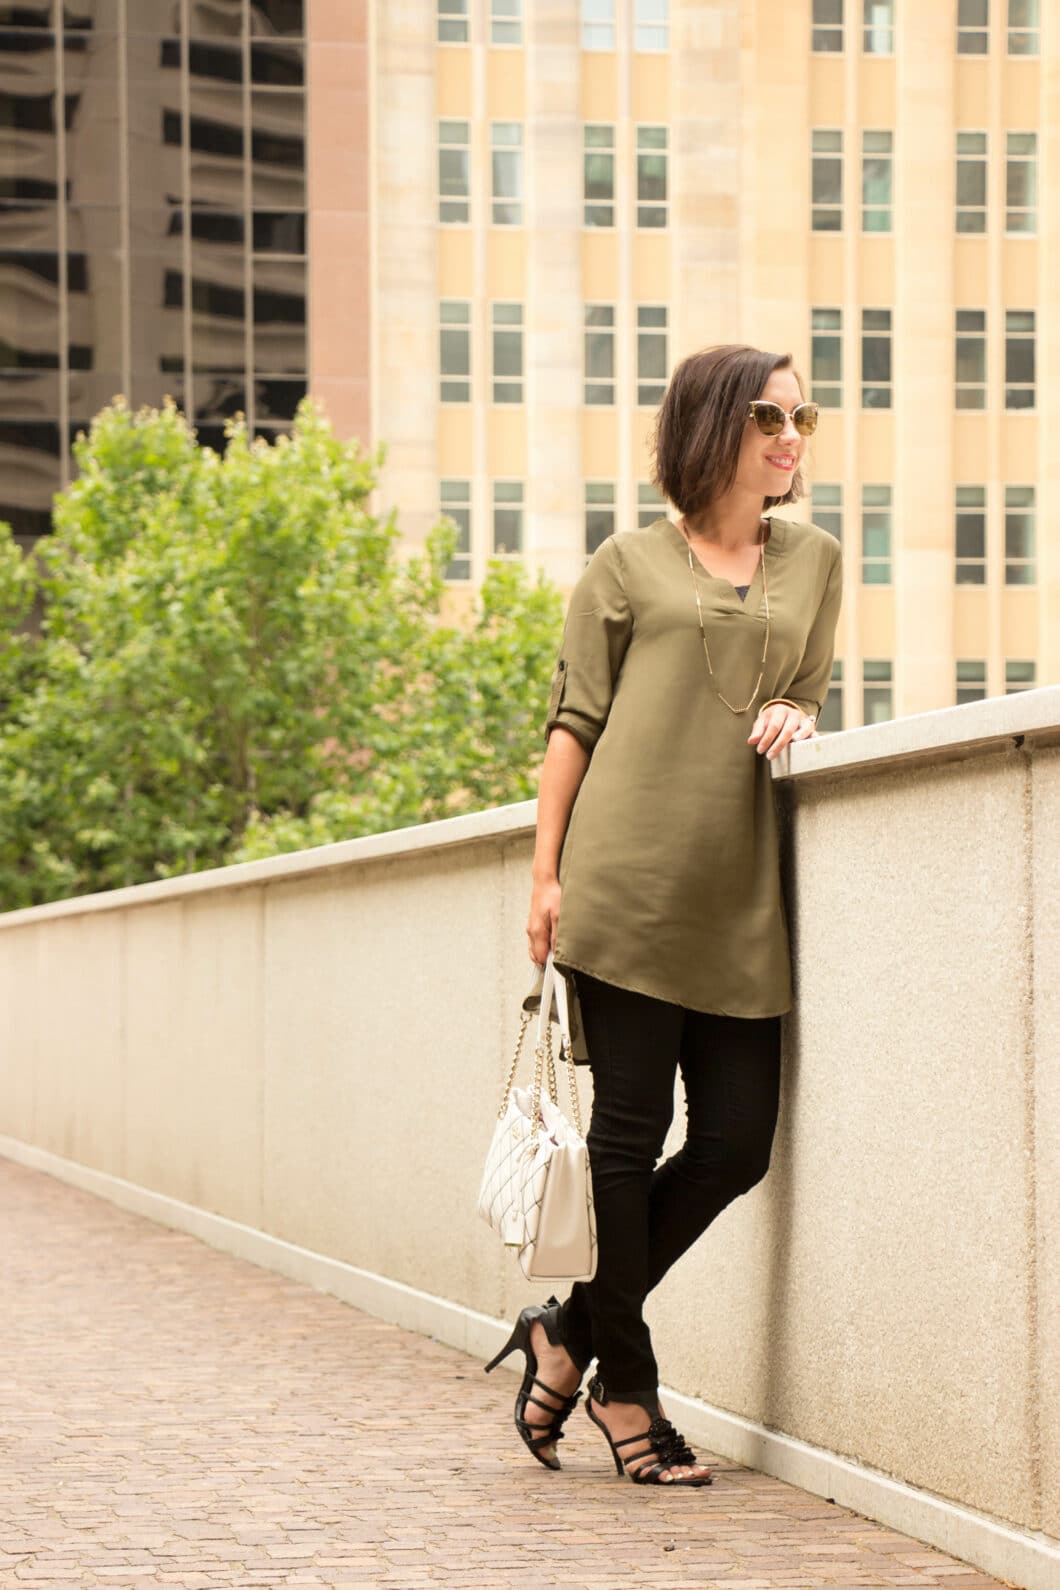 Casual & Chic Featuring a Green Tunic From Chic Me